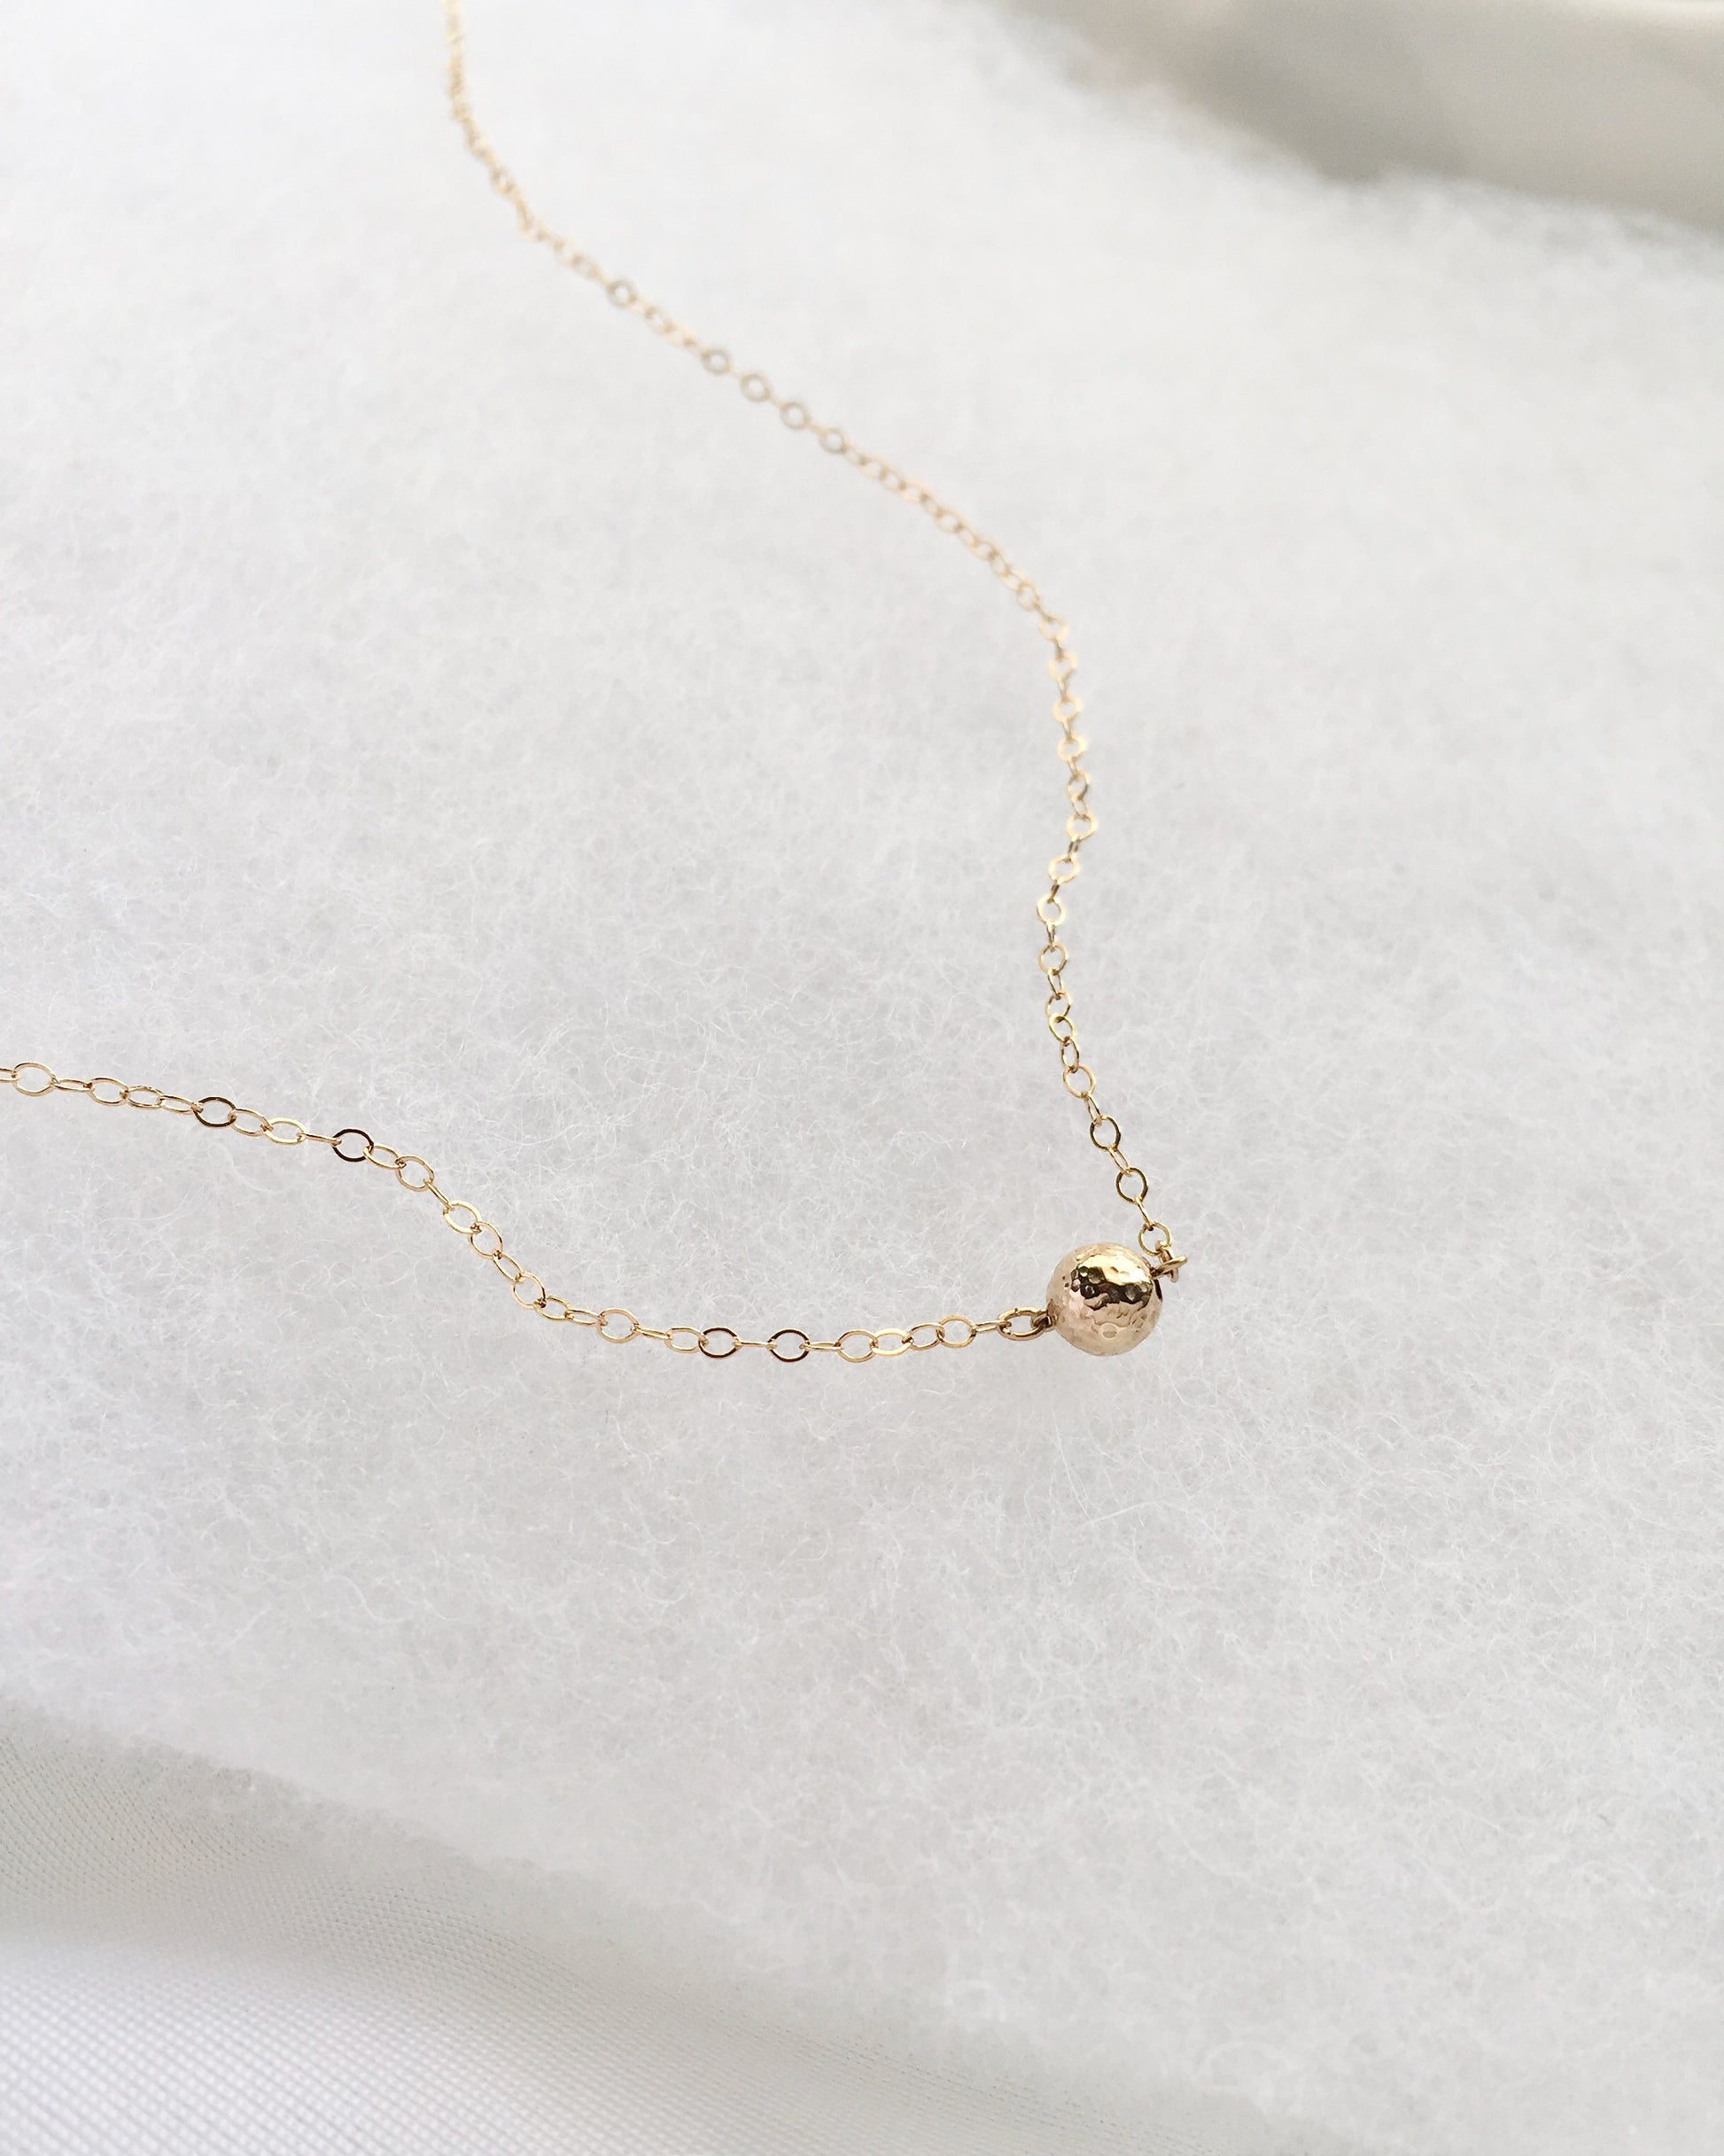 Dainty Gold Ball Necklace | Delicate Choker Necklace | IB Jewelry